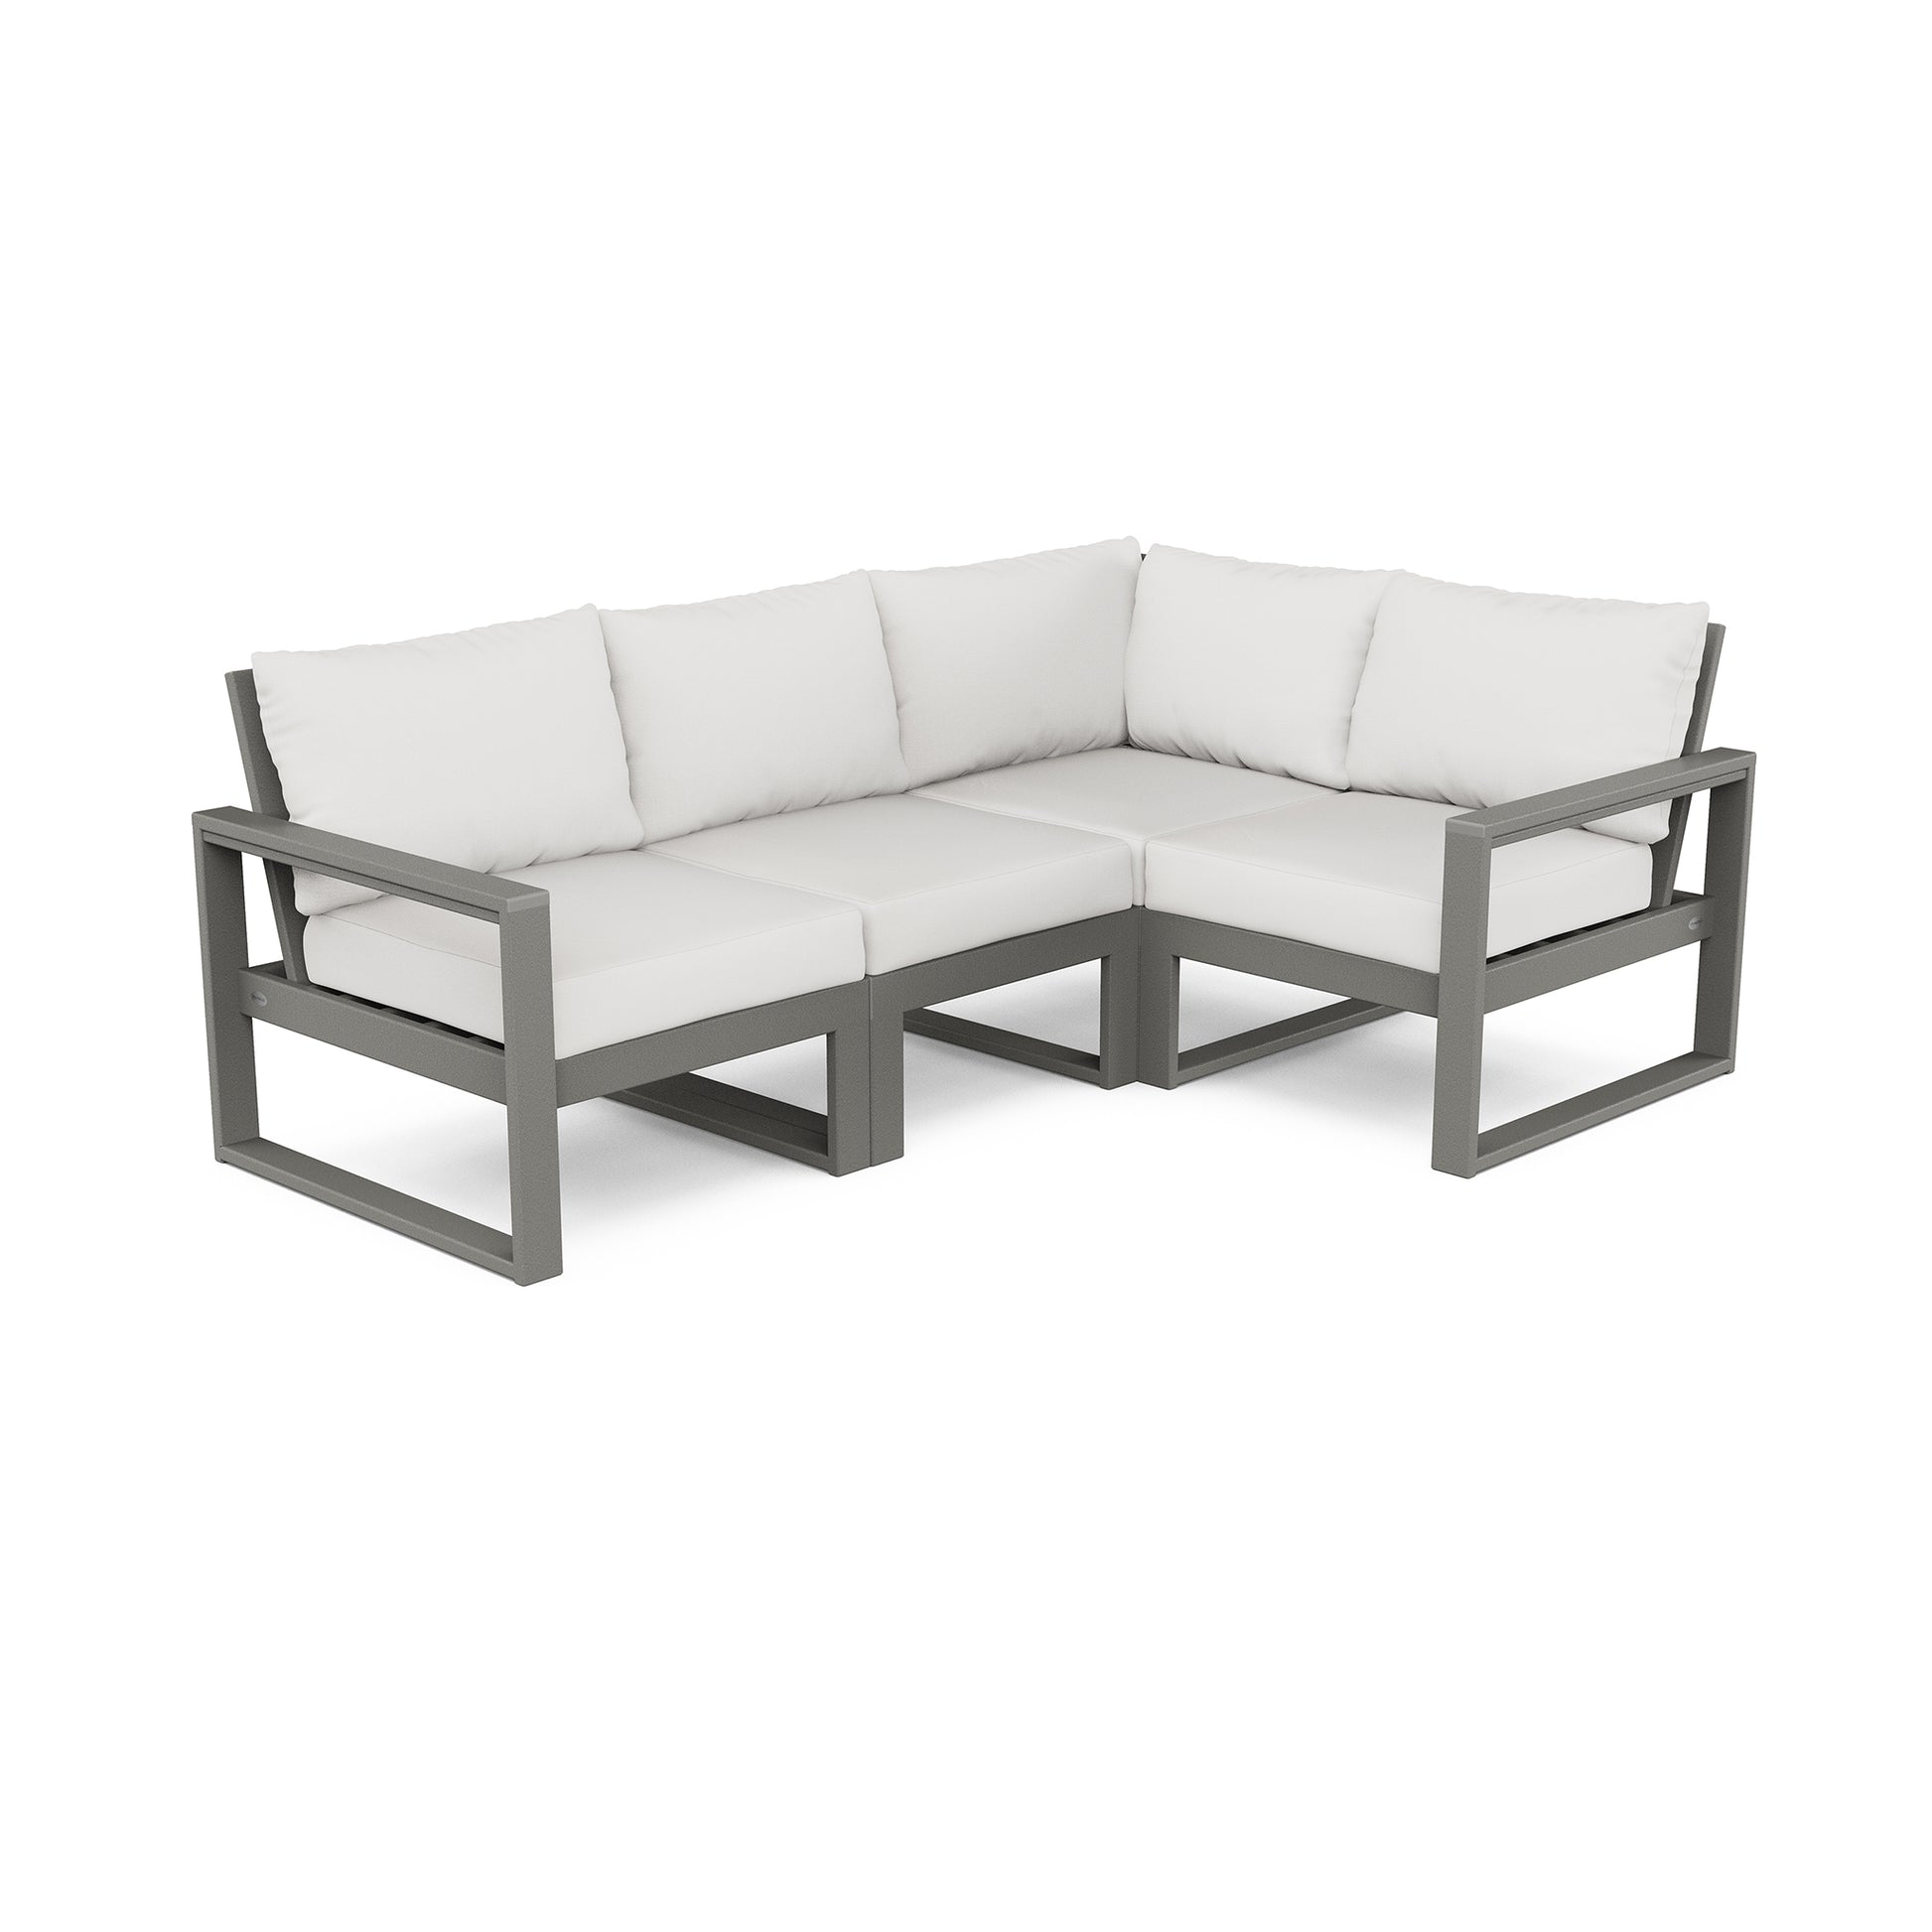 A modern corner sofa with a gray metal frame and white cushions on a plain, isolated background, designed as part of a POLYWOOD EDGE 4-Piece Modular Deep Seating Set.